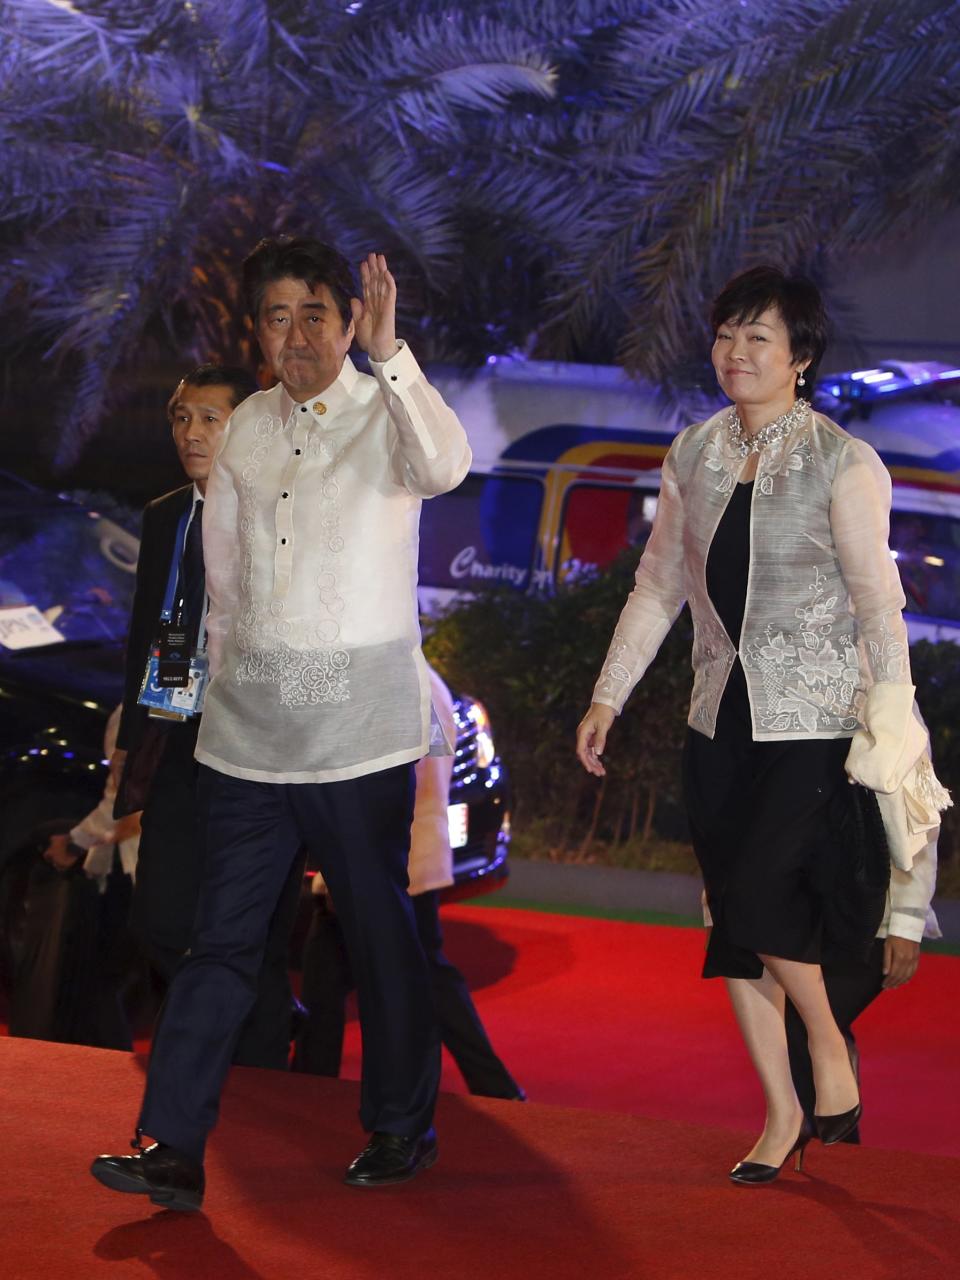 Japan's Prime Minister Shinzo Abe and wife Akie arrive for a welcome dinner during the Asia-Pacific Economic Cooperation (APEC) summit in Manila